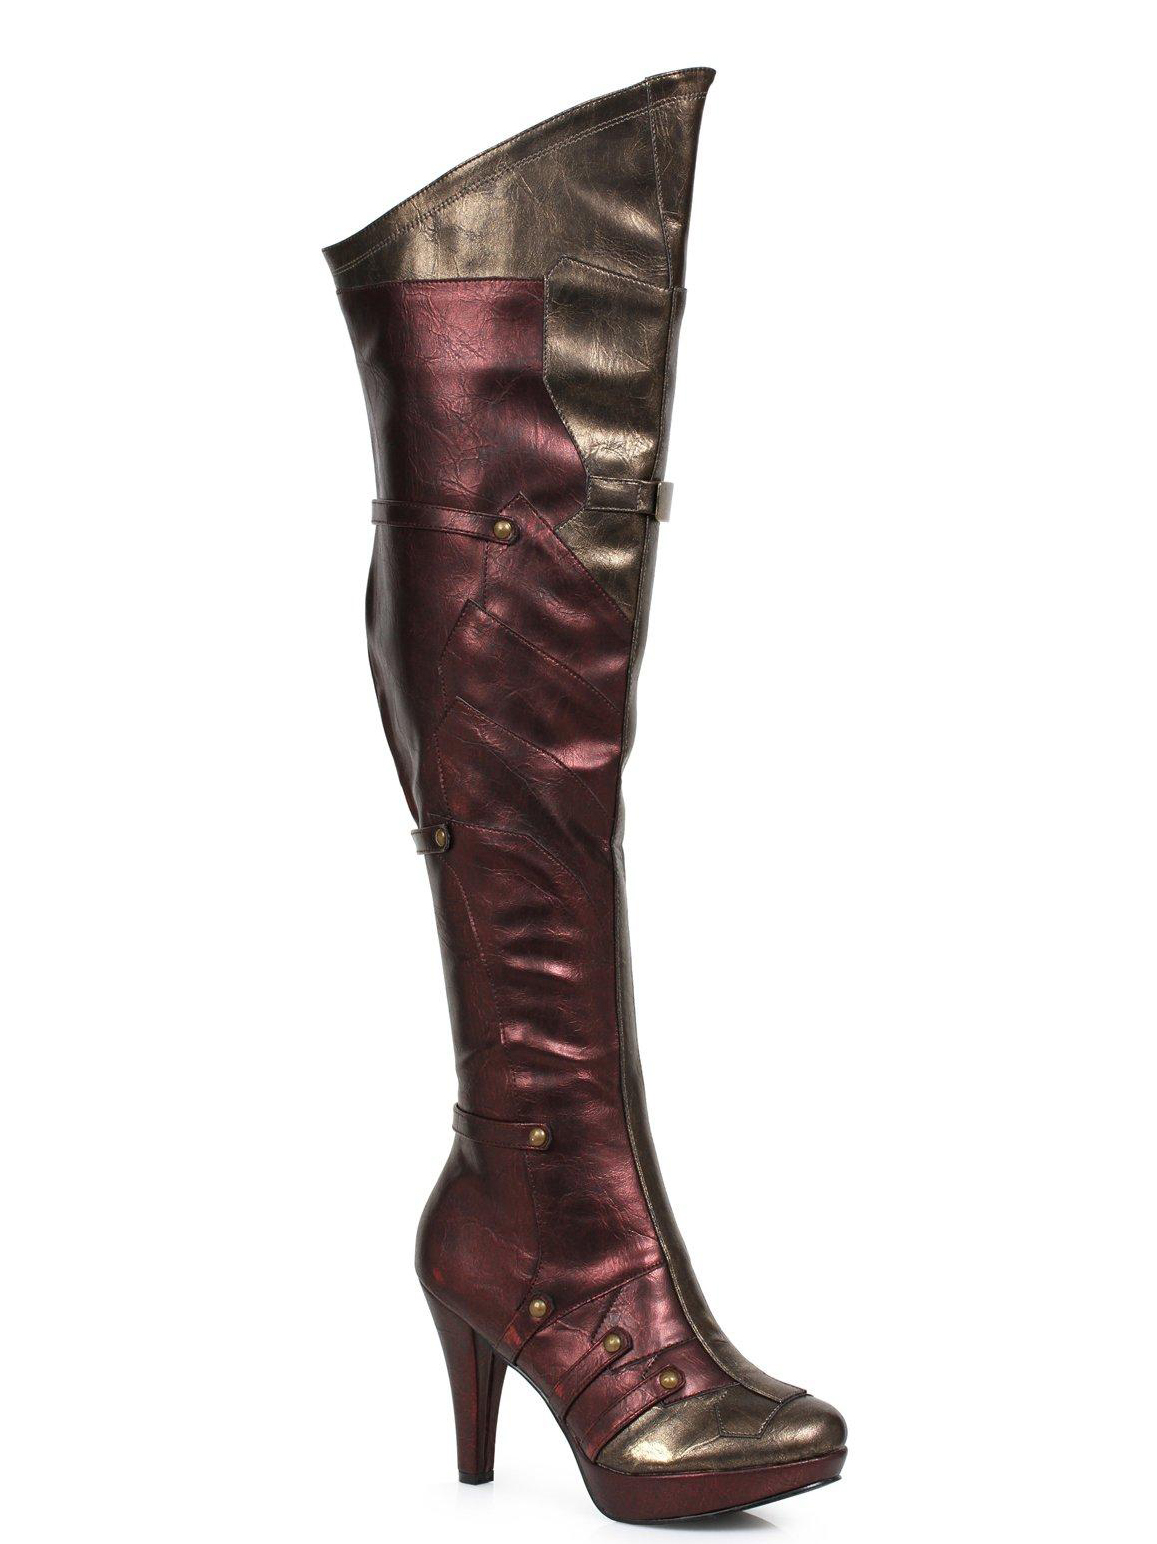 ELLIE SHOES - Women's Thigh High Boots - 9 - image 1 of 2